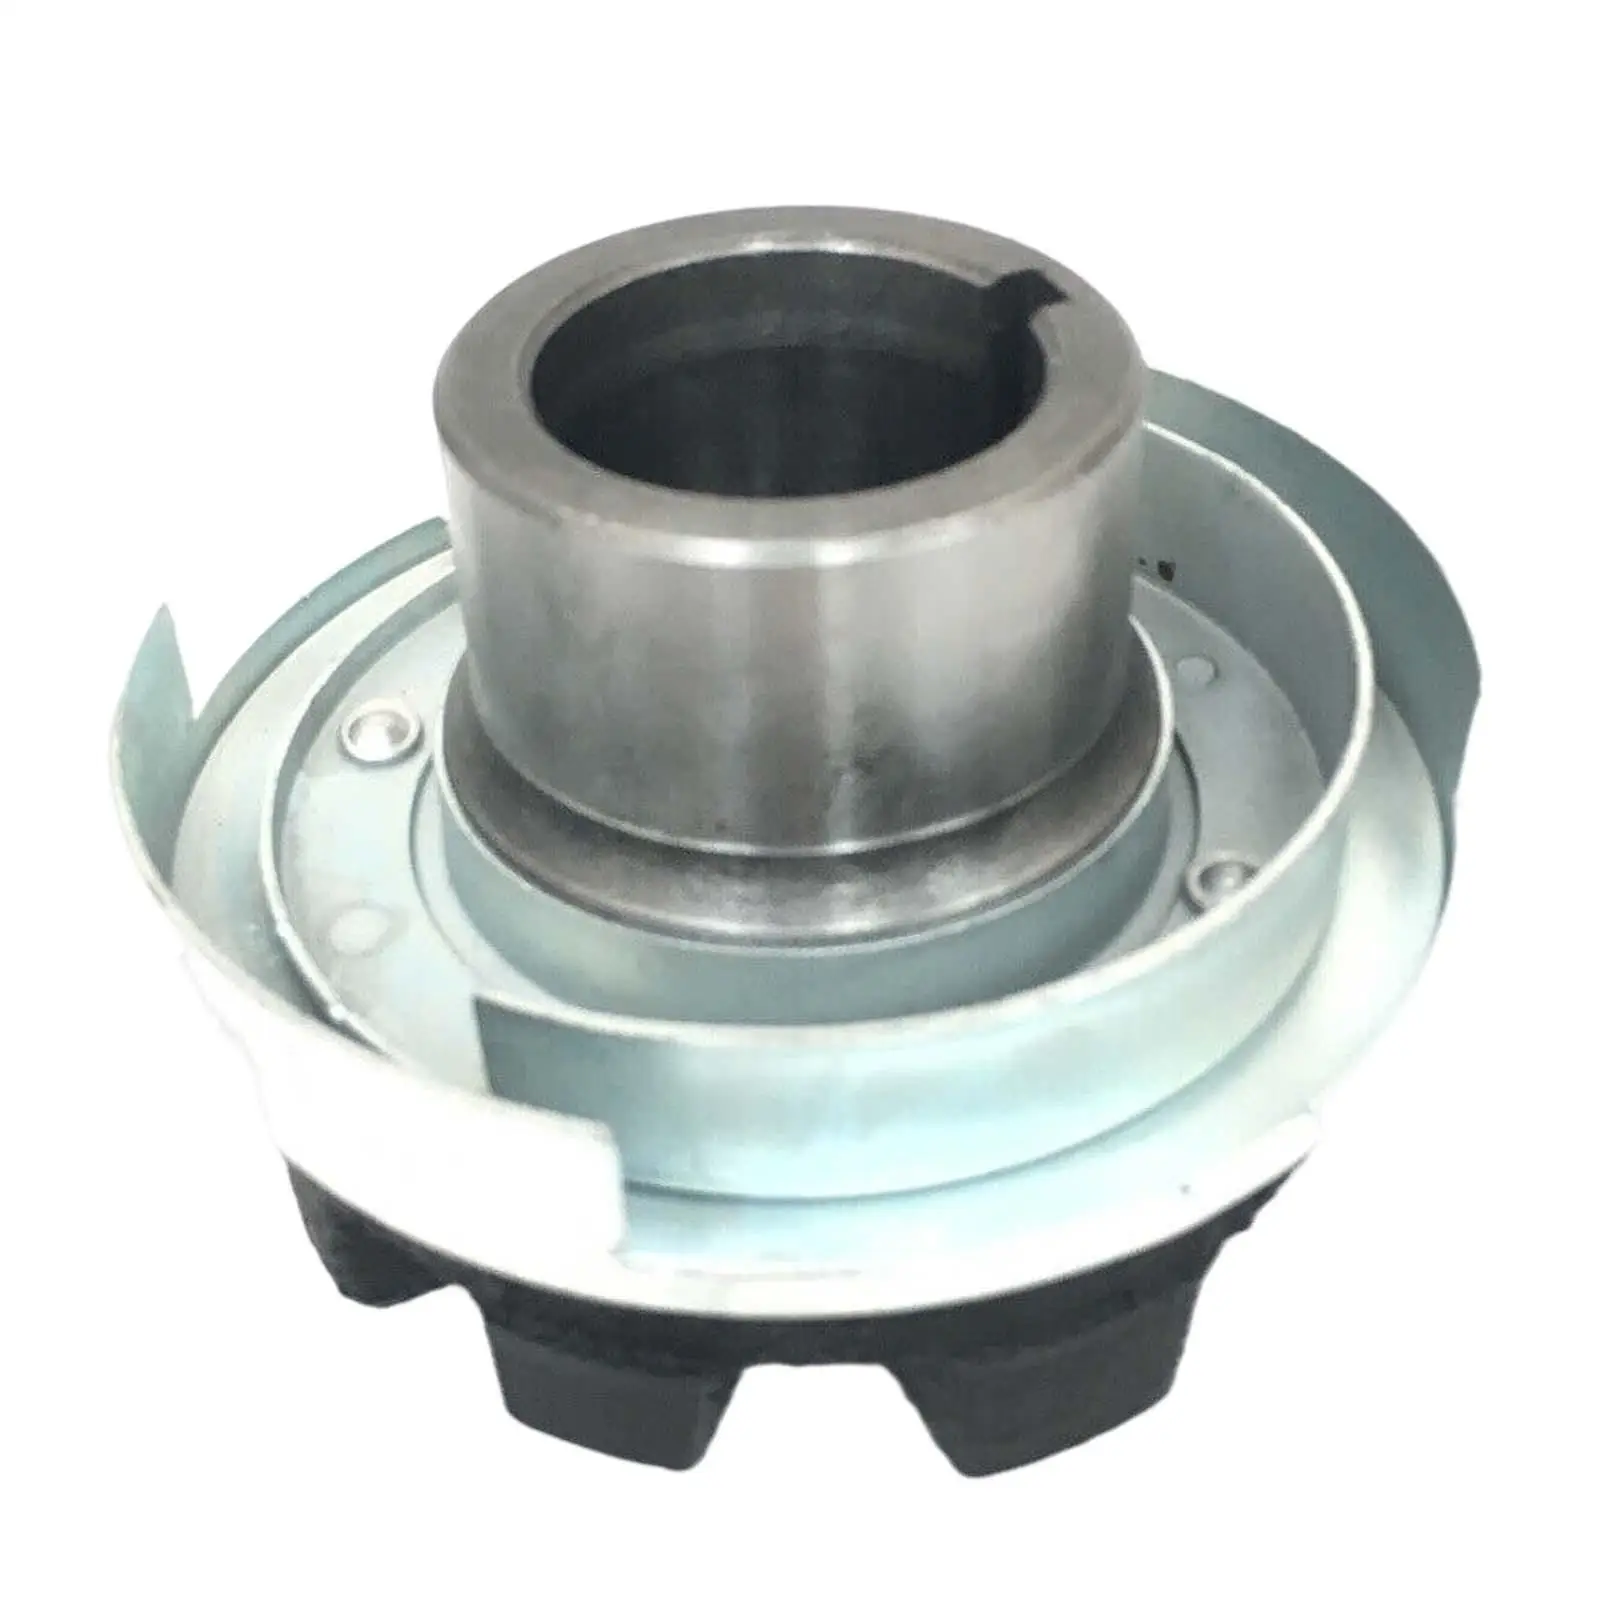 Harmonic Balancer Crankshaft Hub F1zz6C377A Metal Durable Replace Parts Easy Installation for Ford Mustang 2.3L 4 cyl